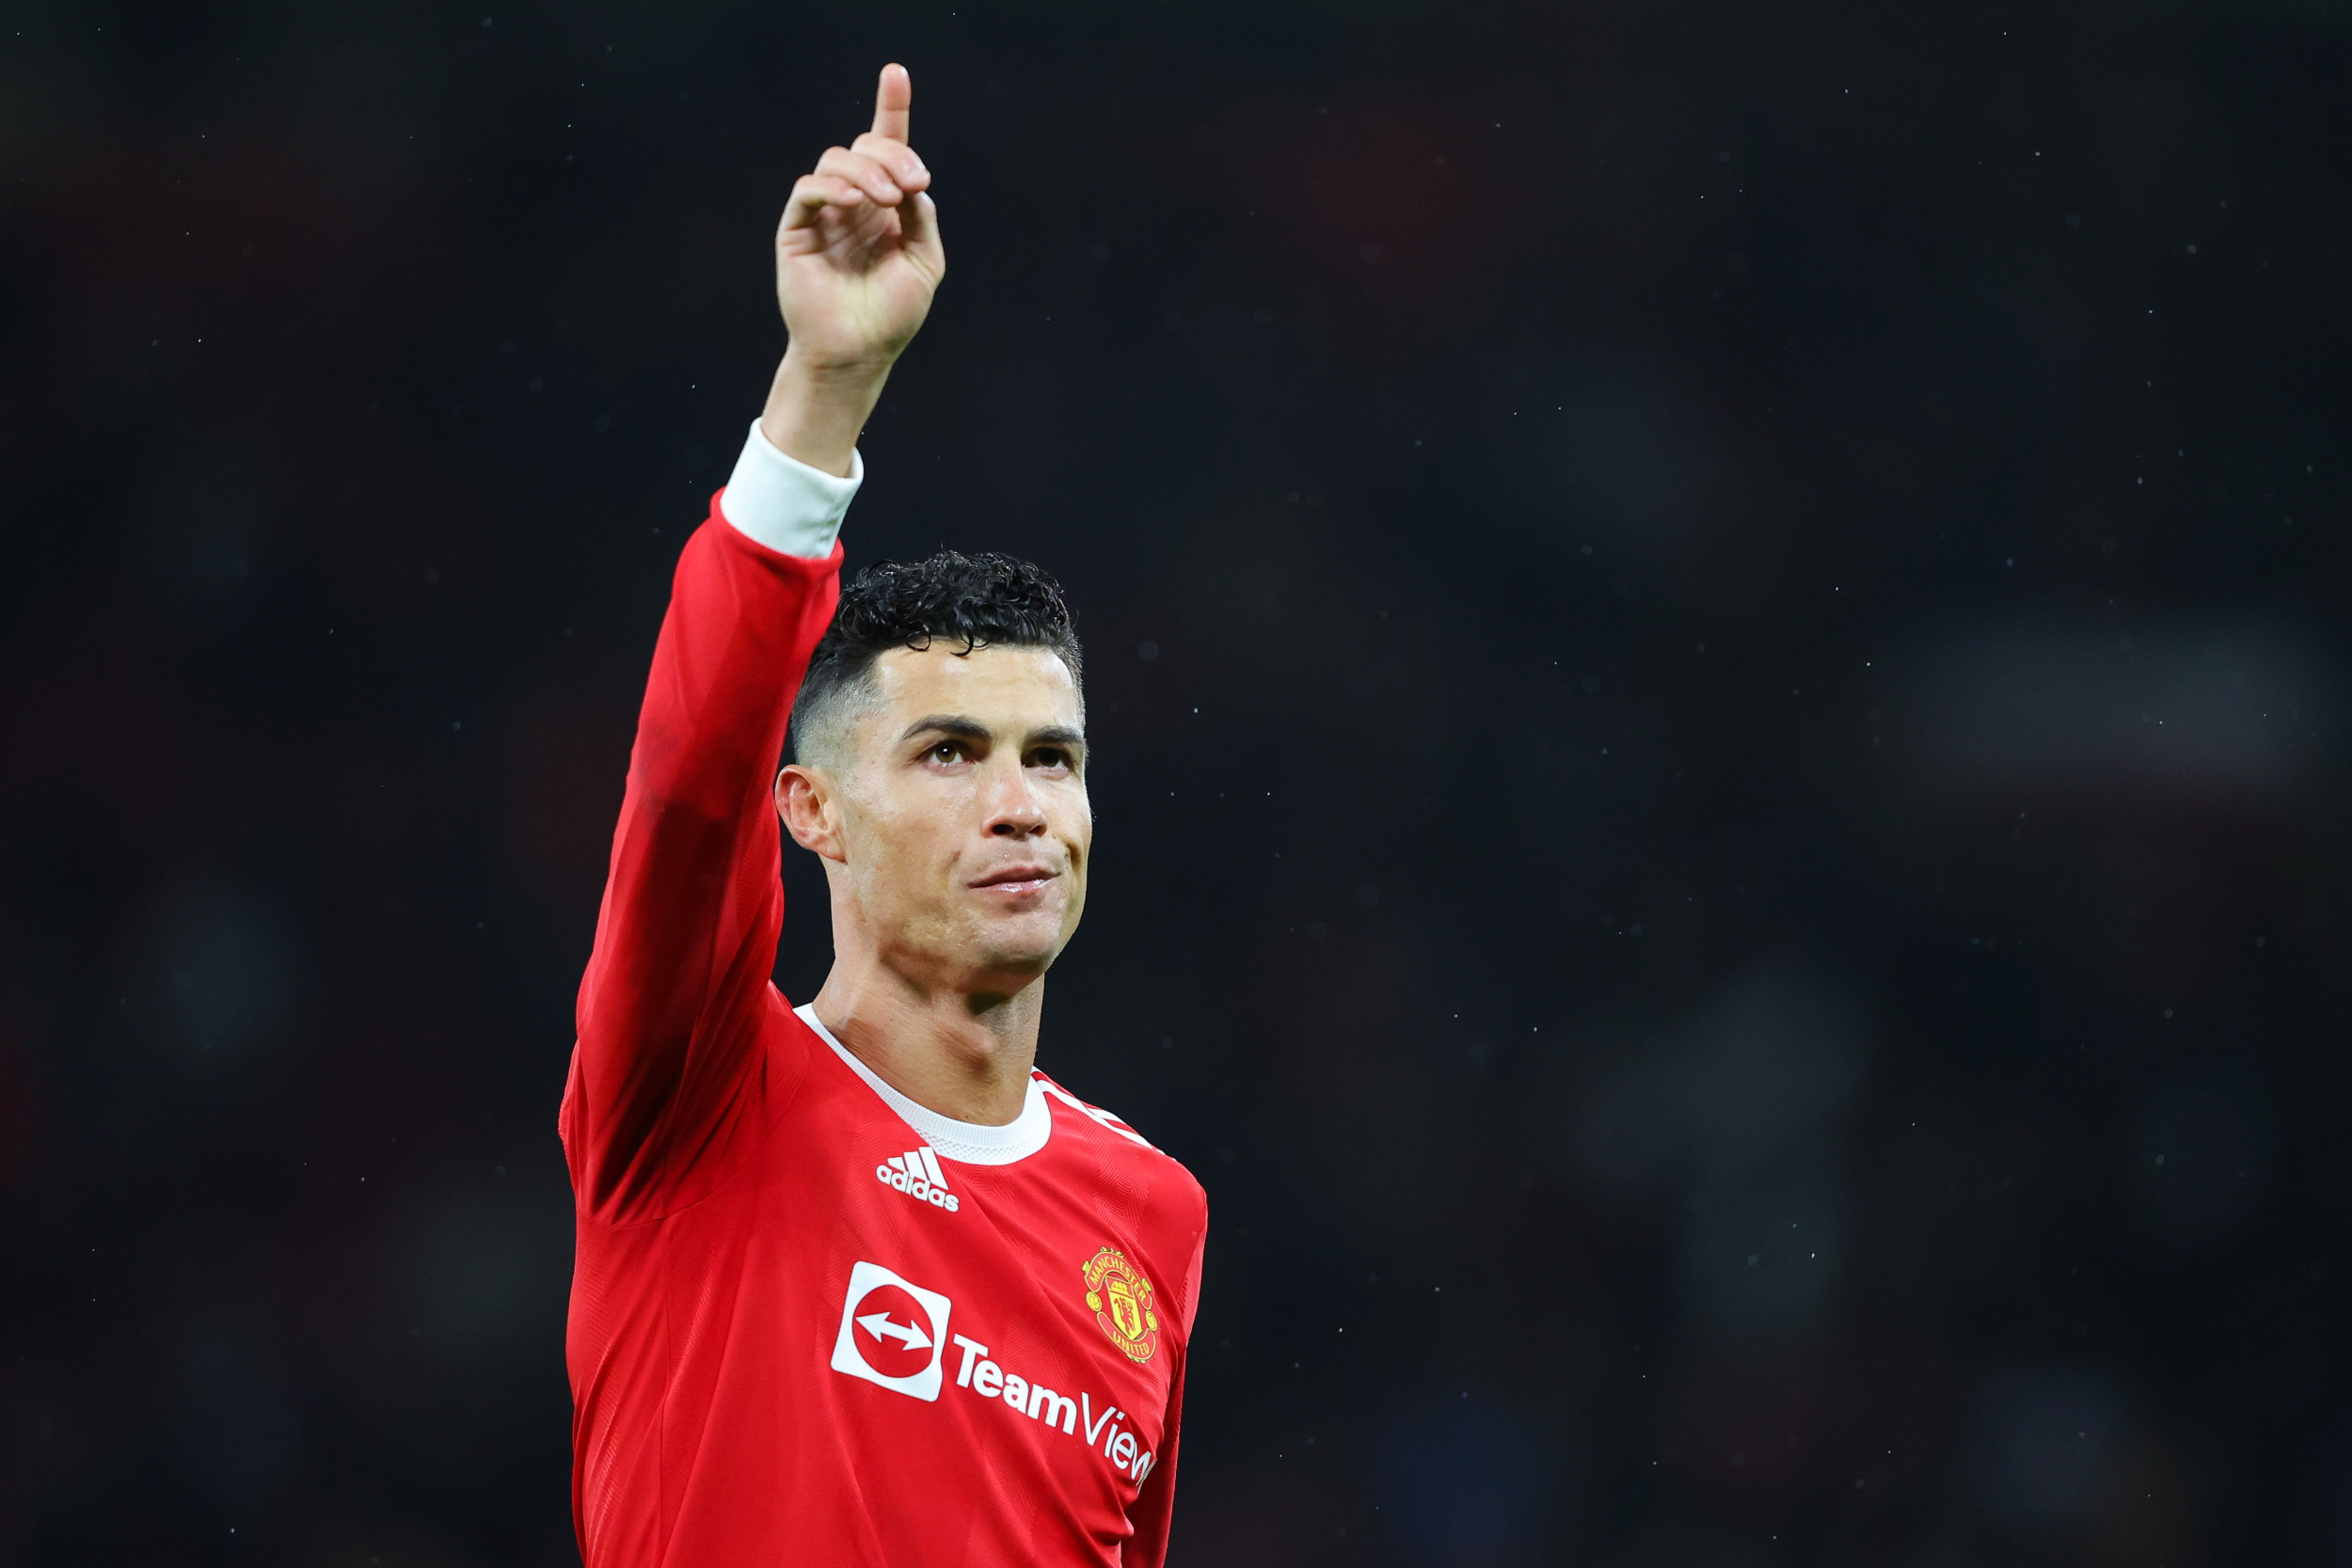 Cristiano Ronaldo a wanted man: PSG, Bayern and Roma in hot pursuit